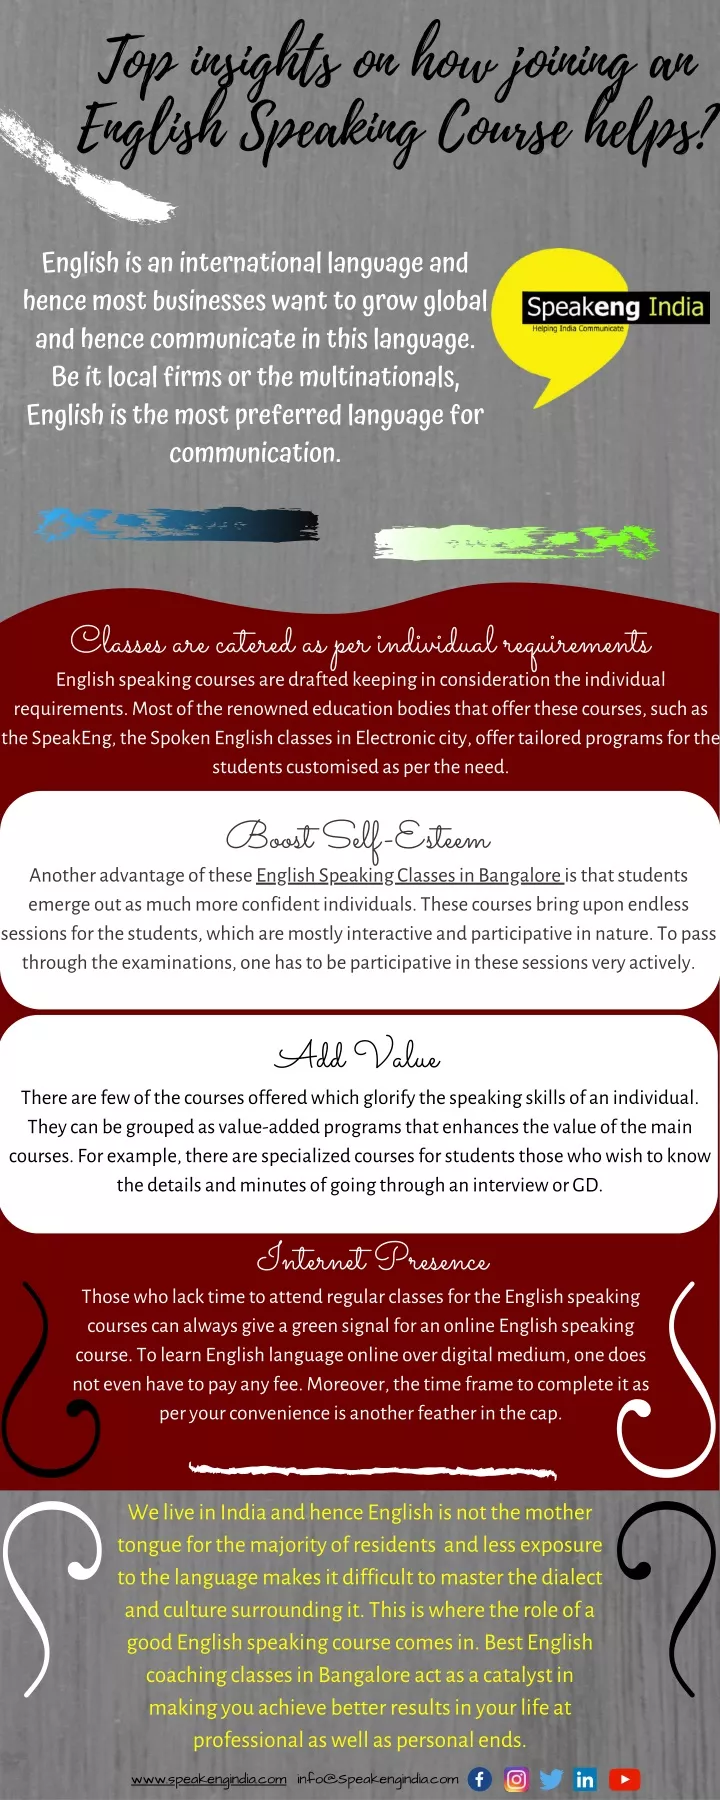 top insights on how joining an english speaking